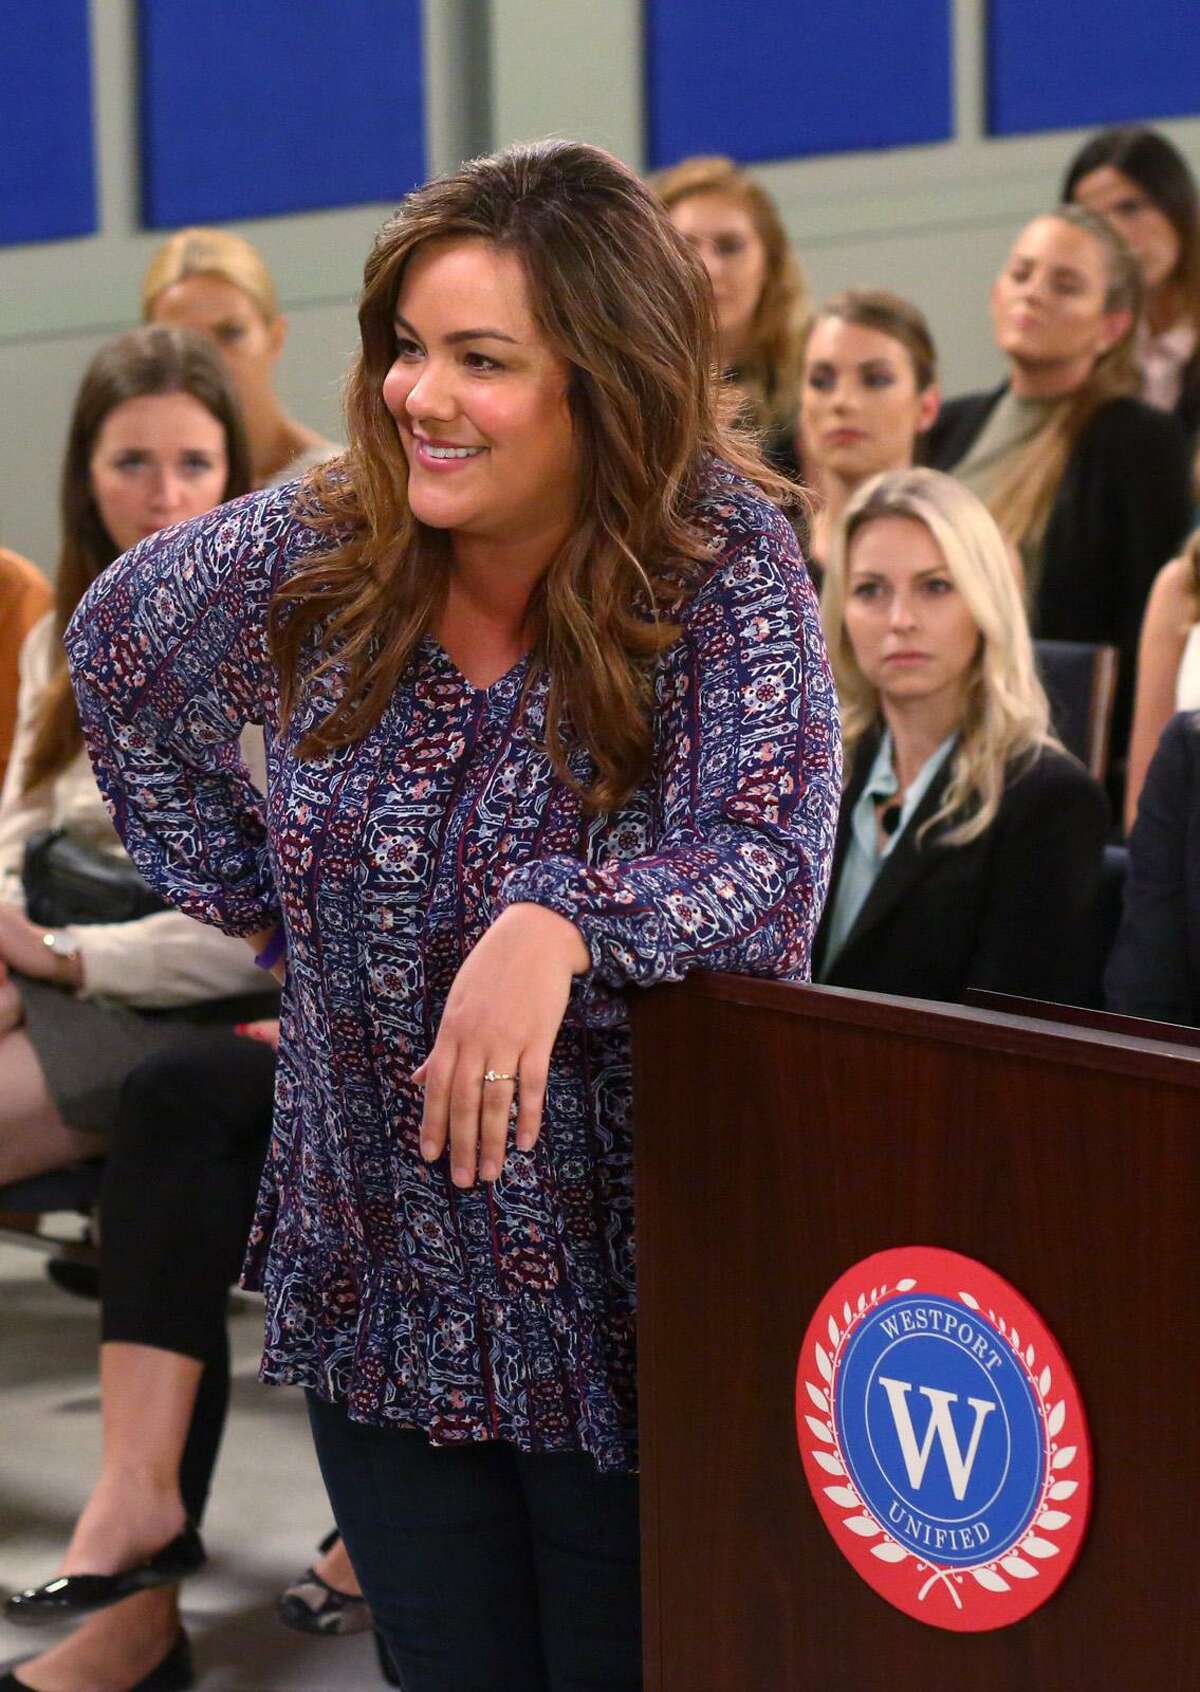 Actress Katy Mixon as Westport housewife Katie Otto in the "Boar-Dain" episode of "American Housewife." The prime-time sitcom has upset many in Norwalk with the disparaging jokes aimed at the city.